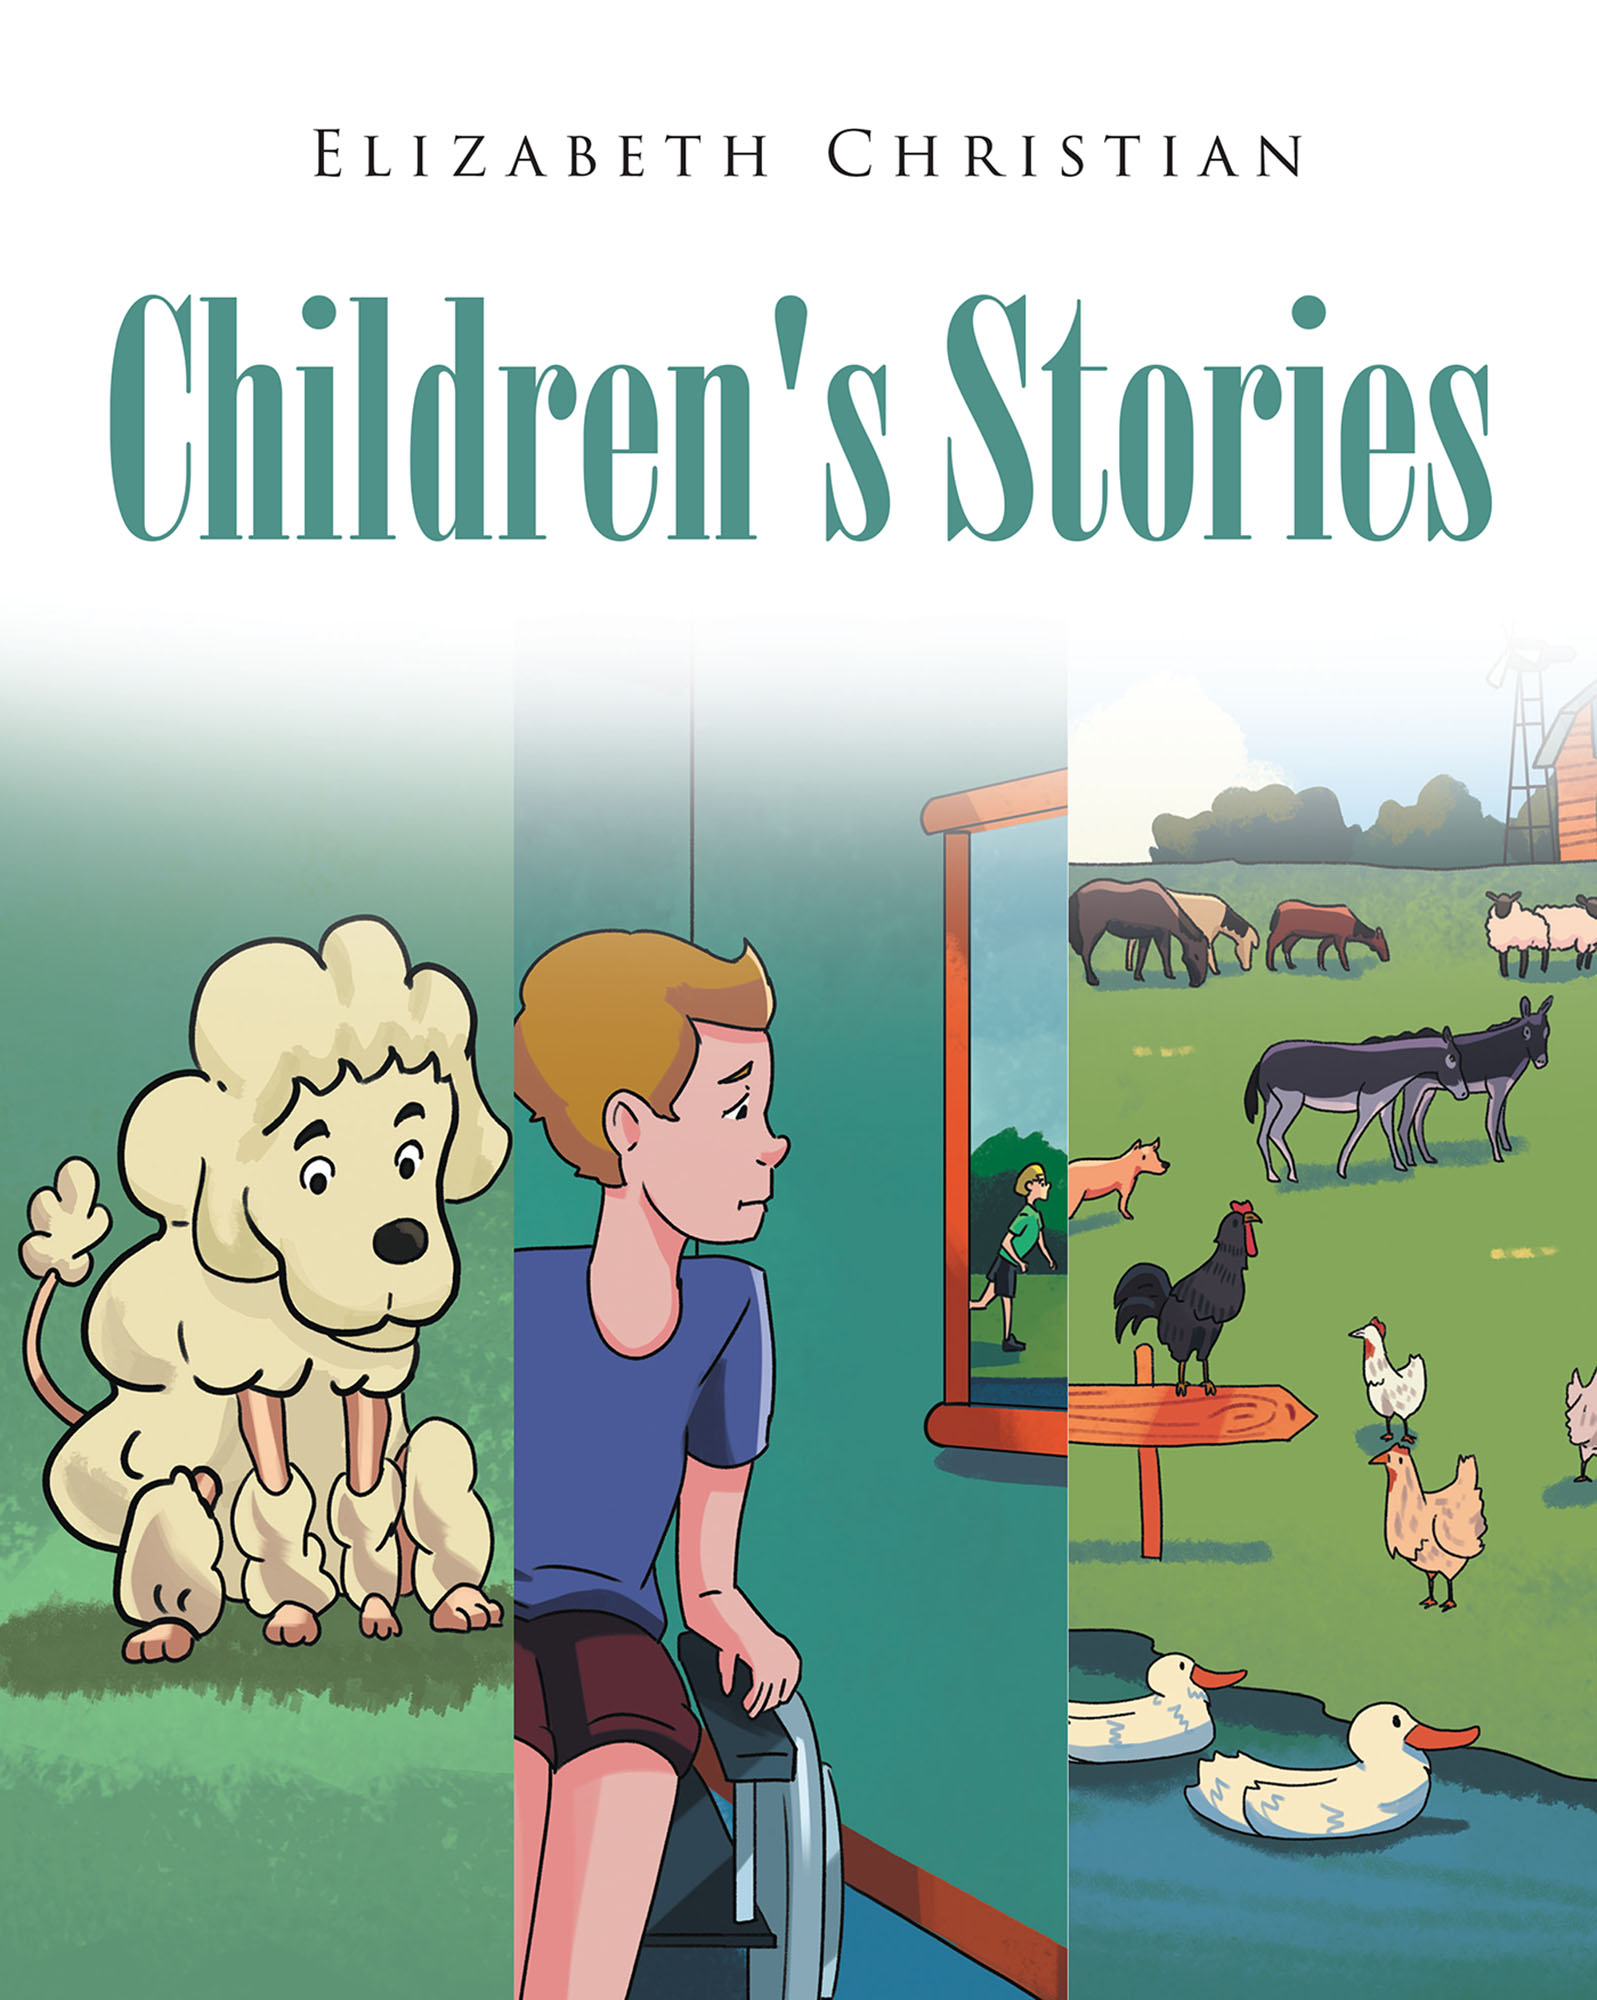 Children's Stories Cover Image